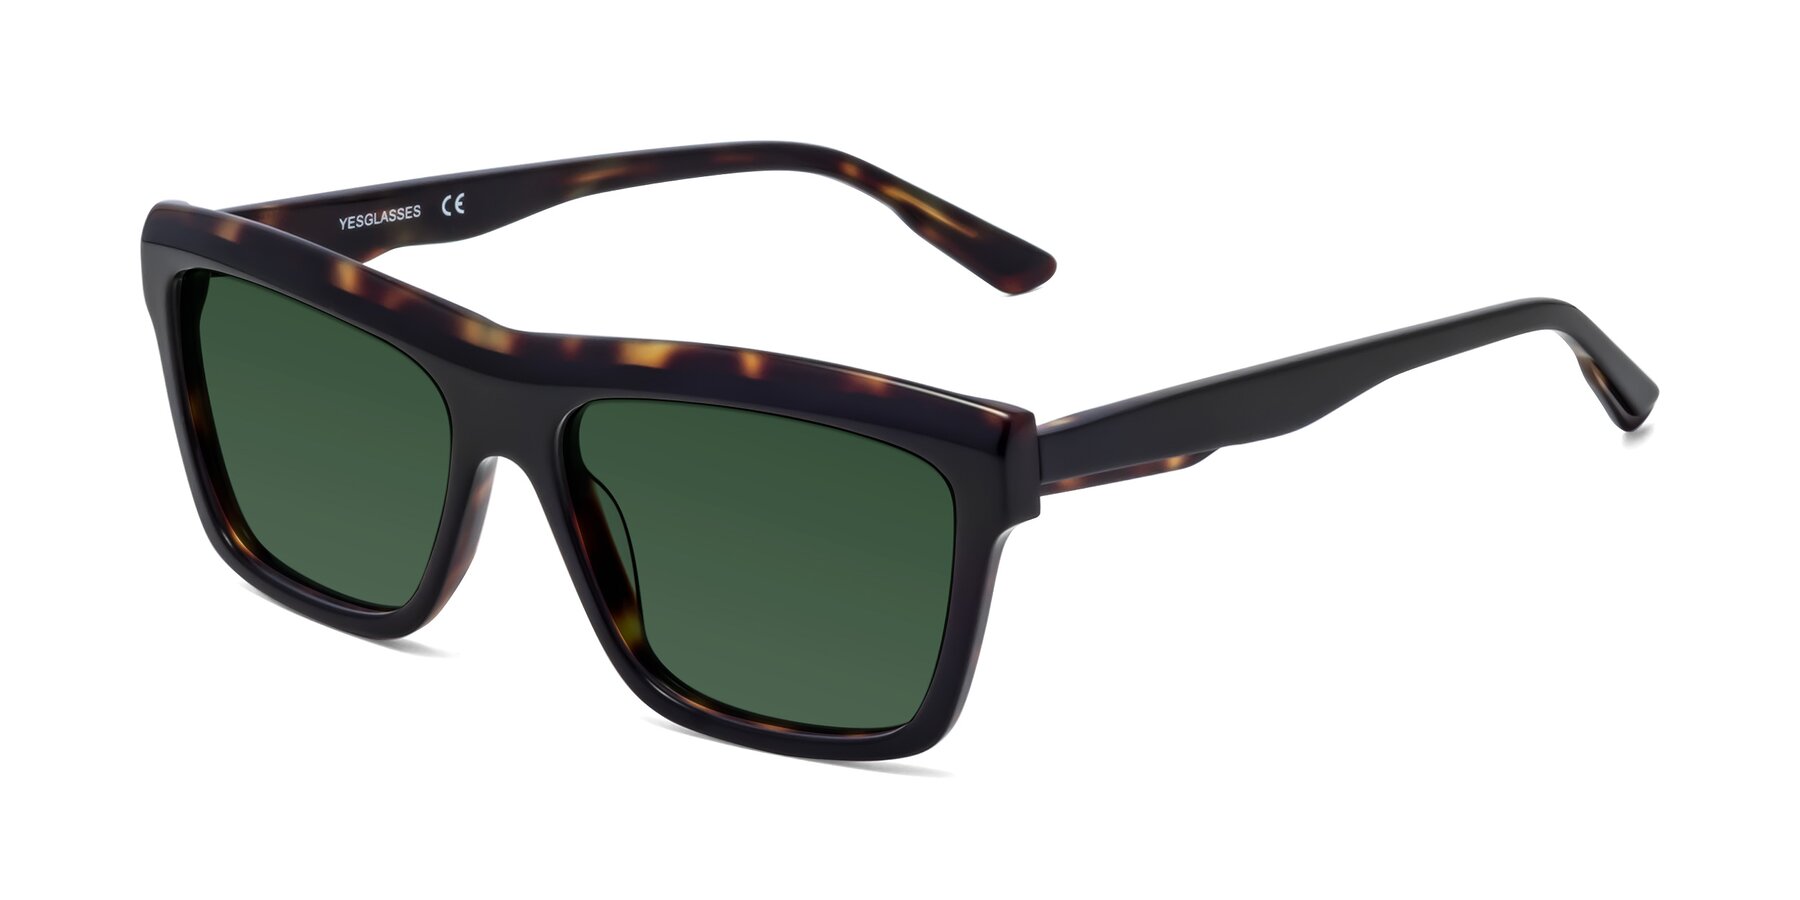 Angle of 1481 in Tortoise with Green Tinted Lenses